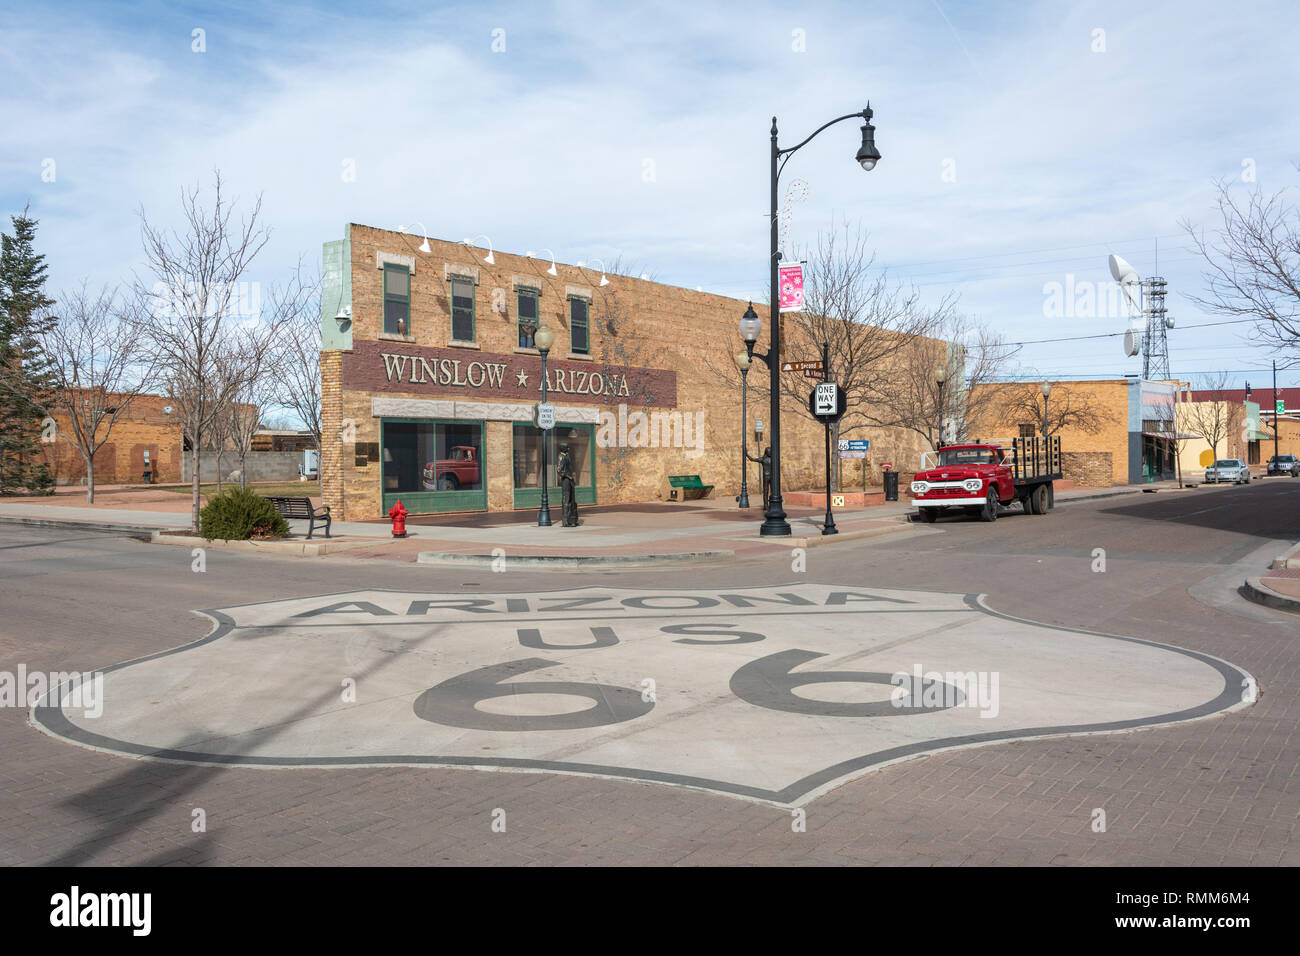 Winslow, Arizona, United States of America - January 4, 2017. Standin' On The Corner Park in Winslow, AZ, with statue, historic building, murals, Rout Stock Photo